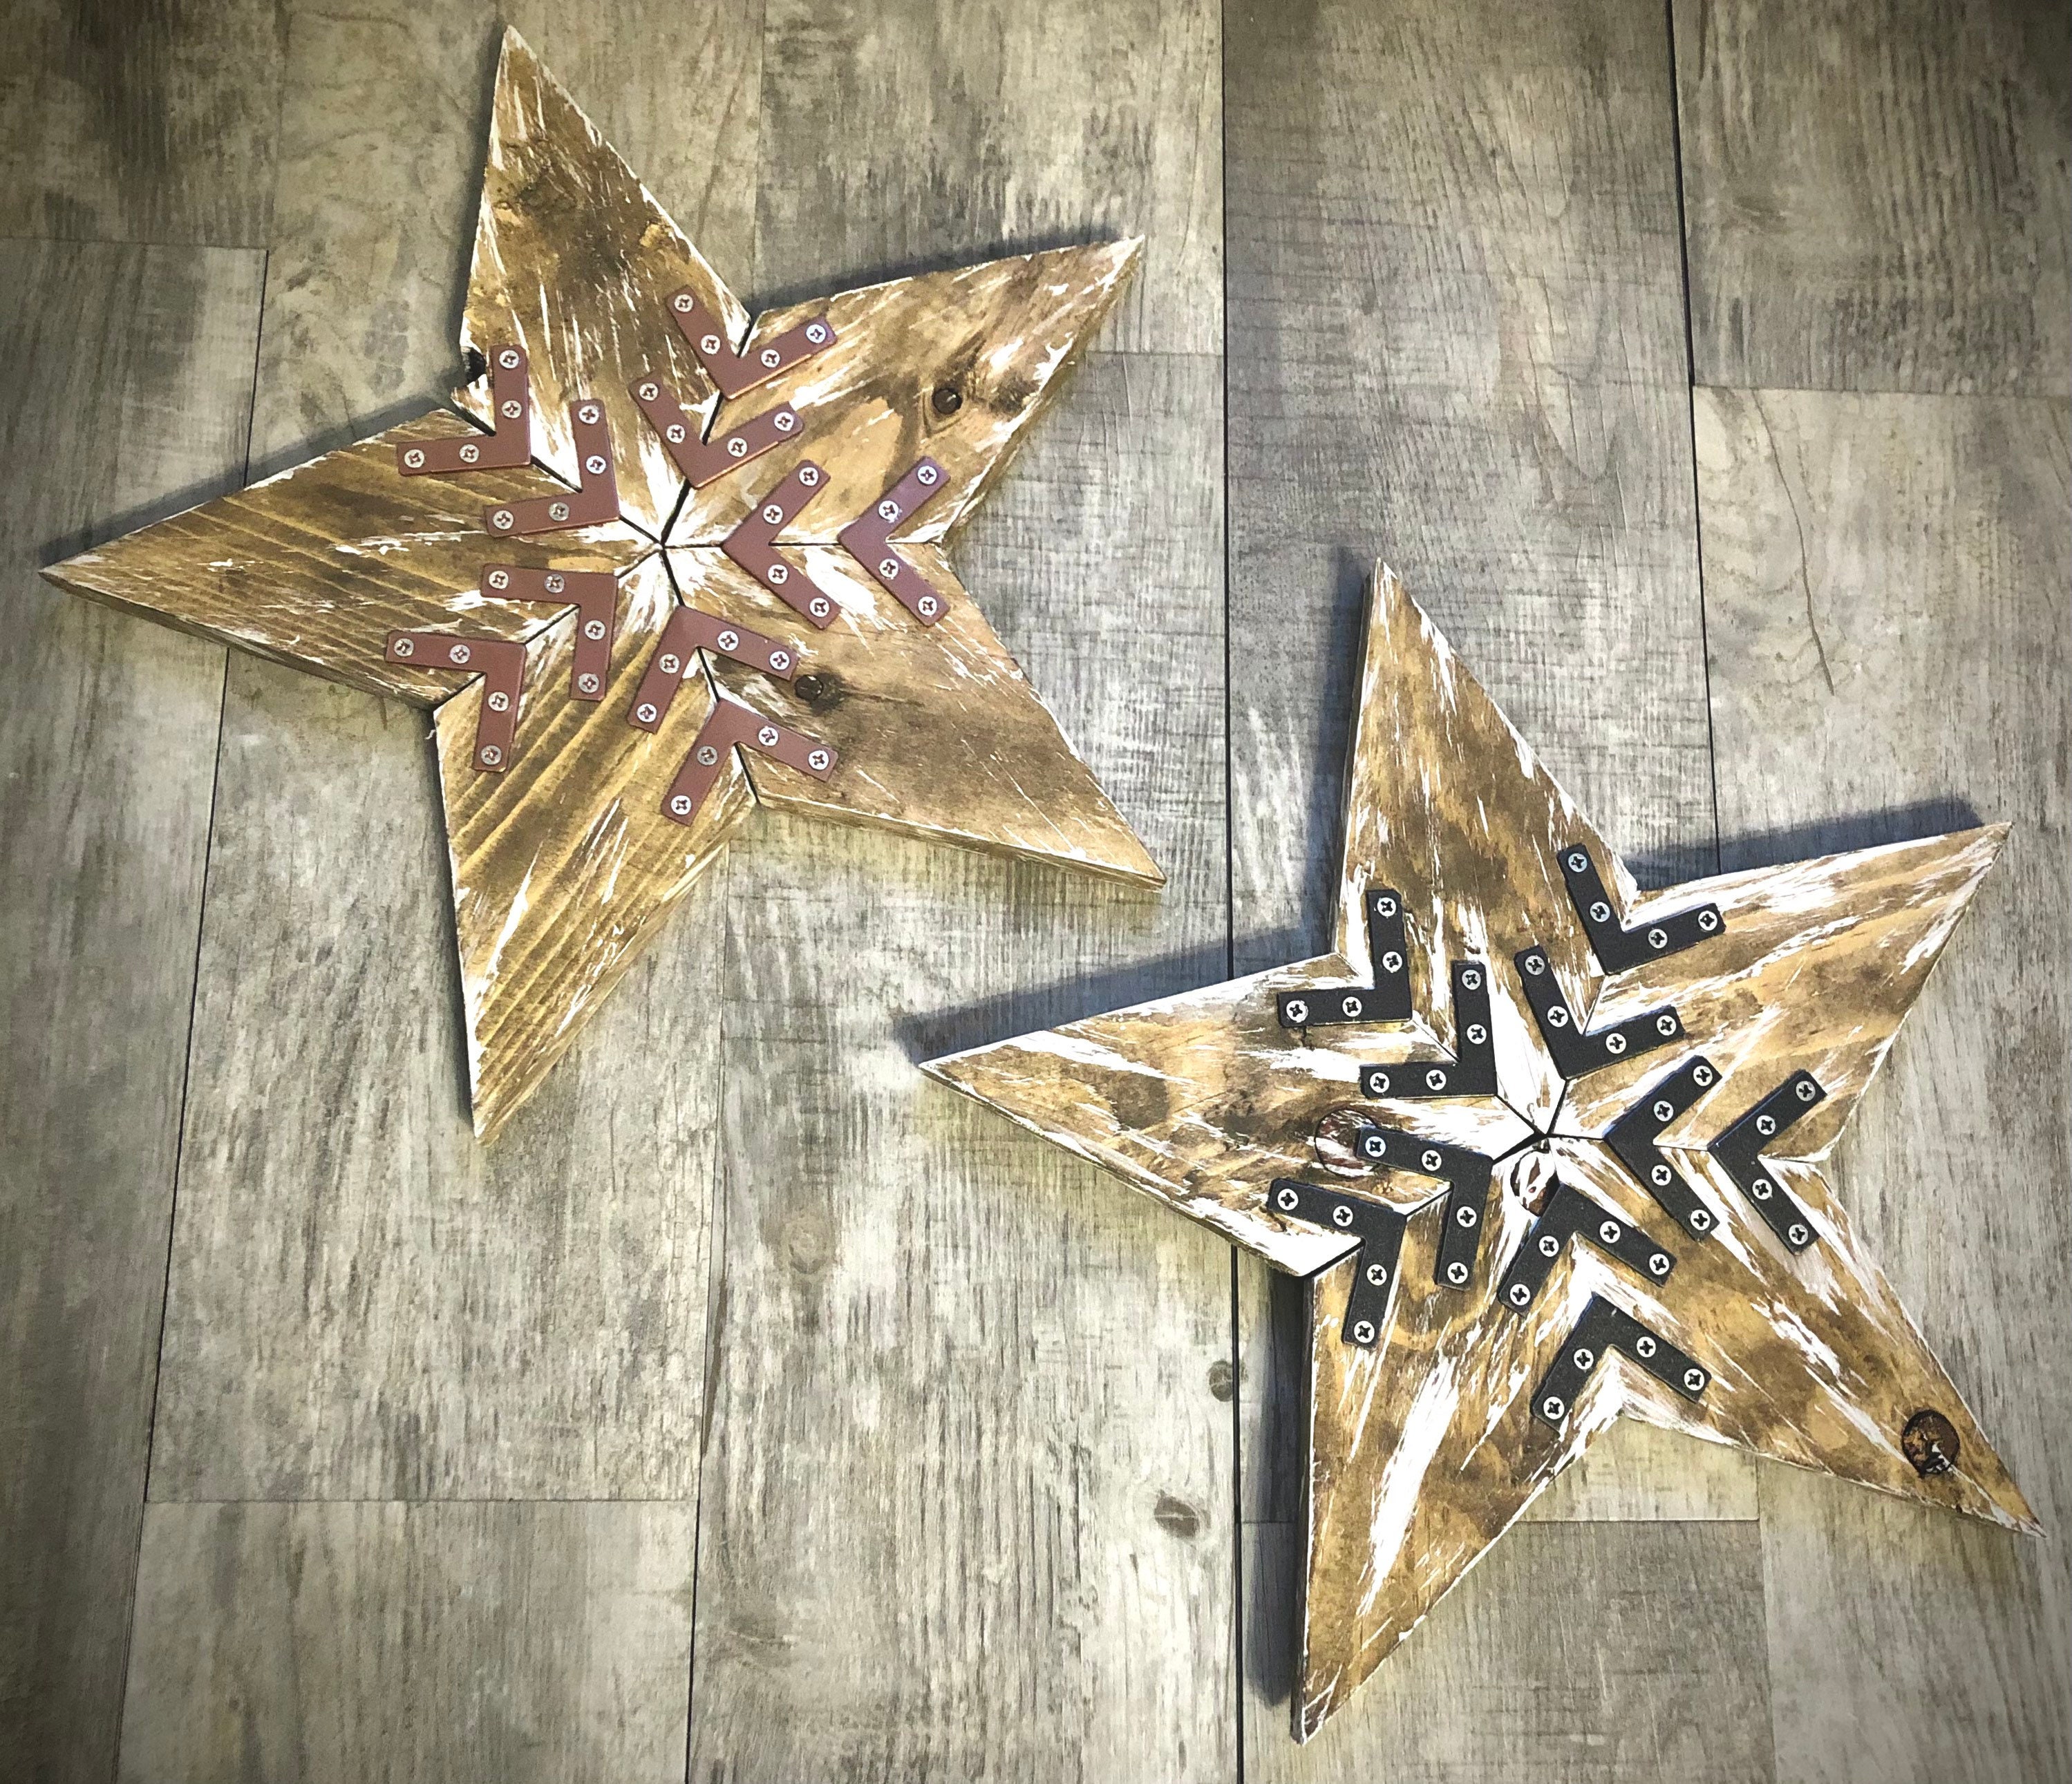 Set Of 2 Distressed Grey Standing Wooden Stars - Home DecorDefault Title